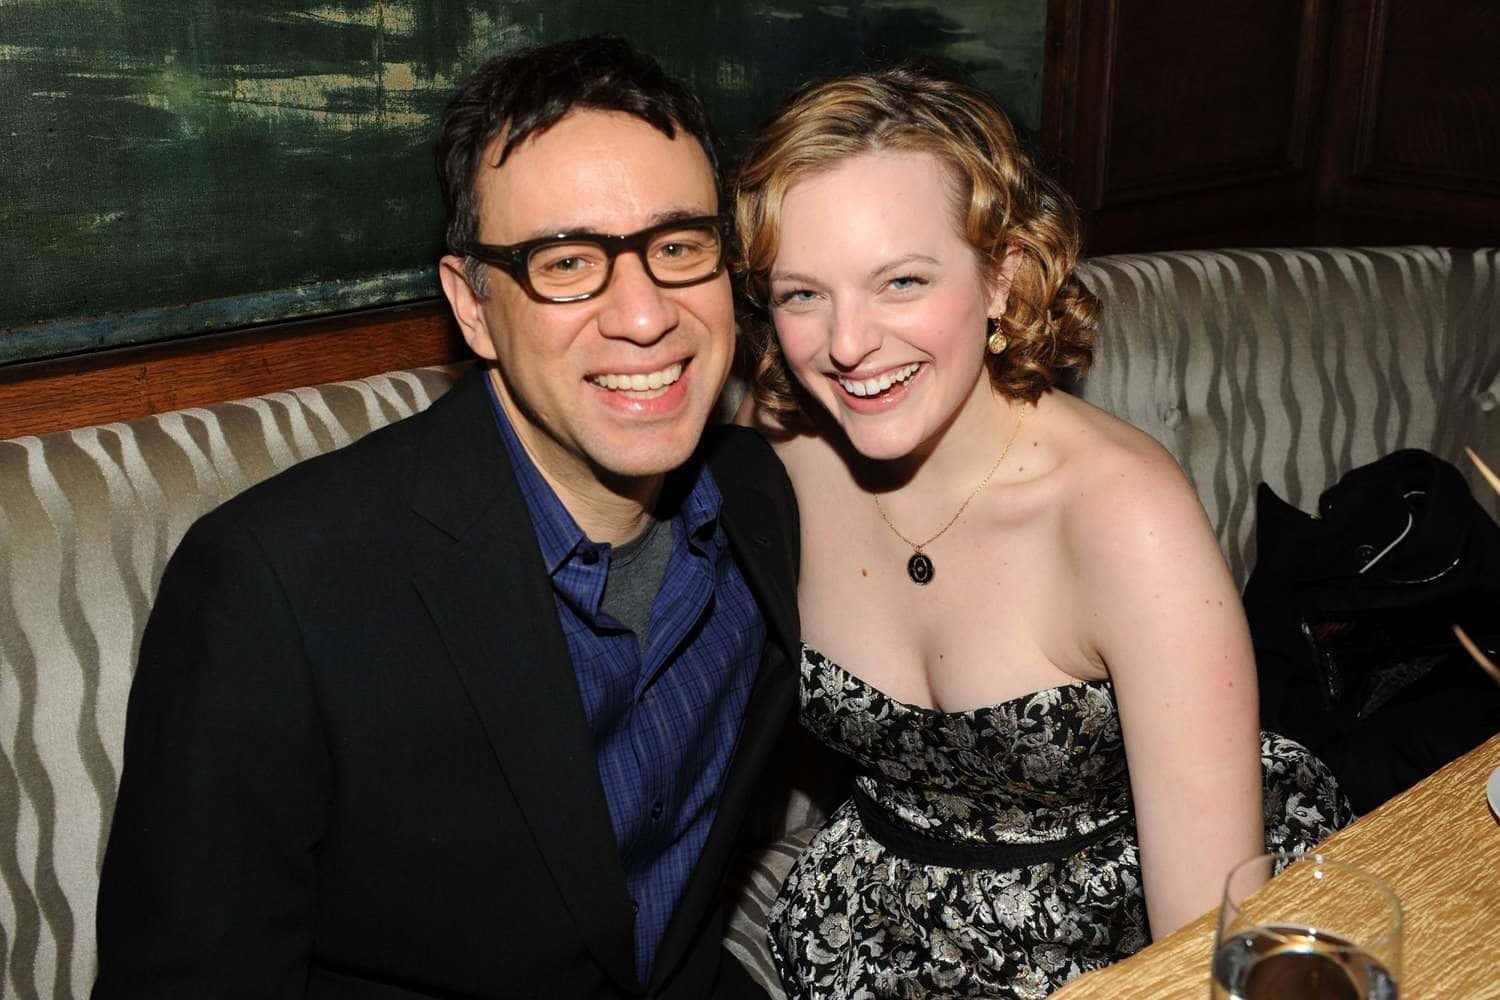 Fredarmisen Is An American Actor, Comedian, And Musician. He Is Best Known For His Work On The Television Show 